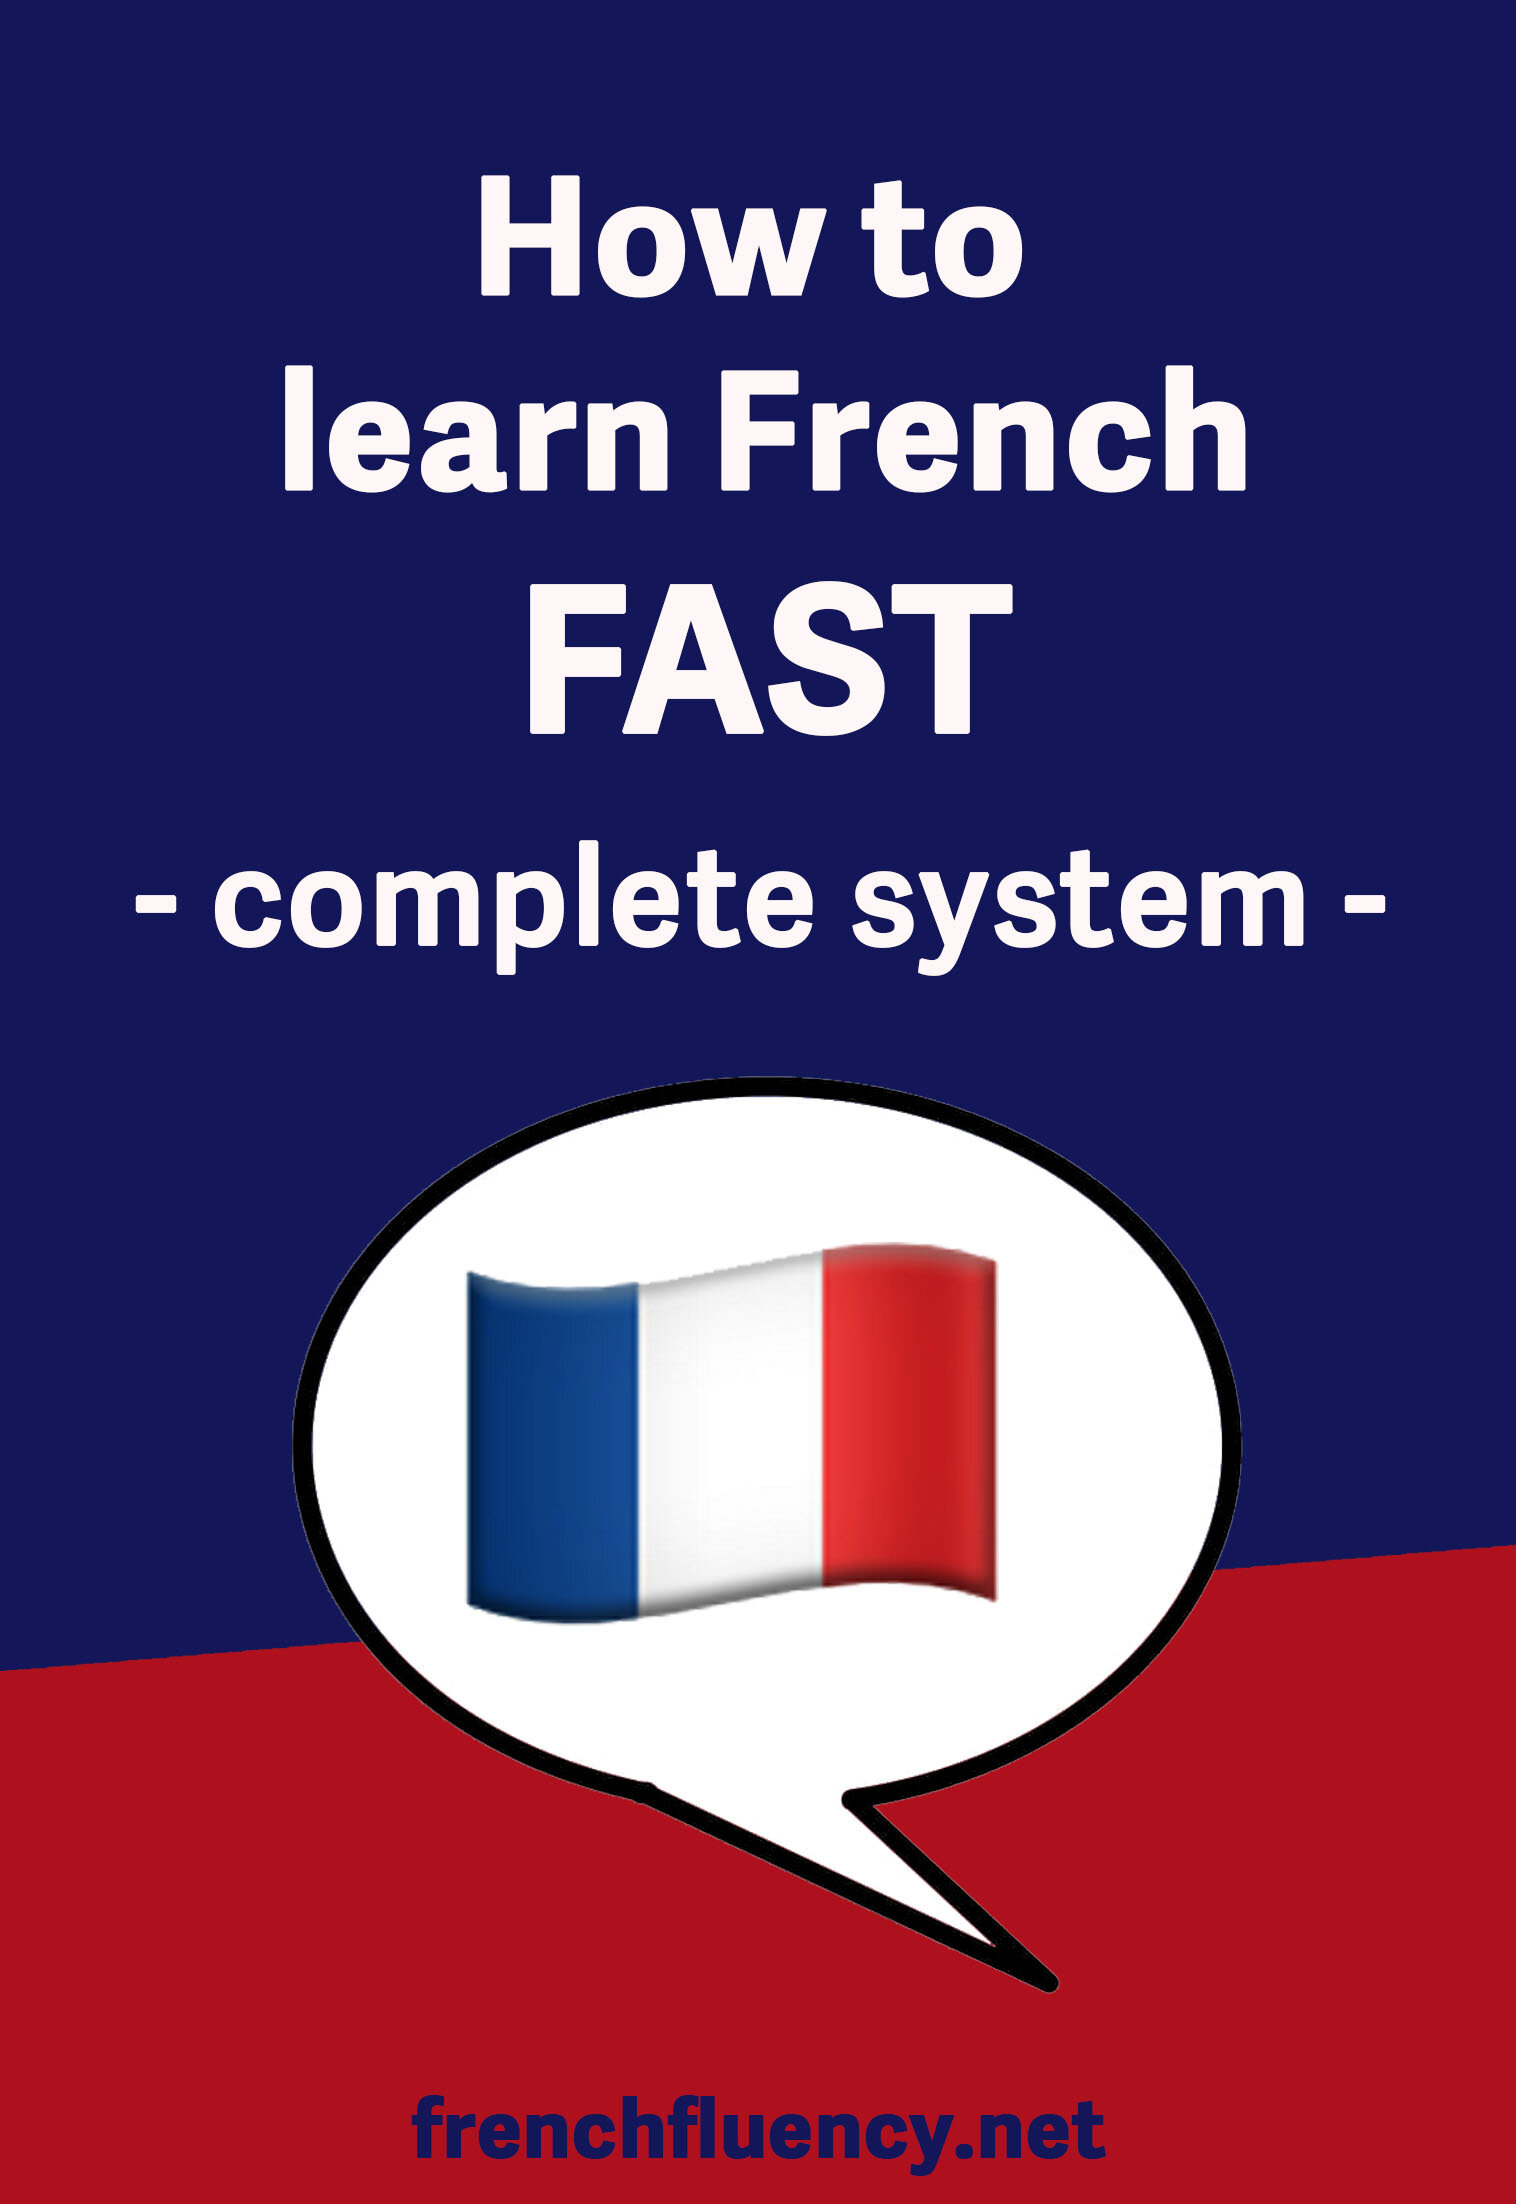 Pin by a. on lol.  Learn french, Learning languages tips, Writing tips